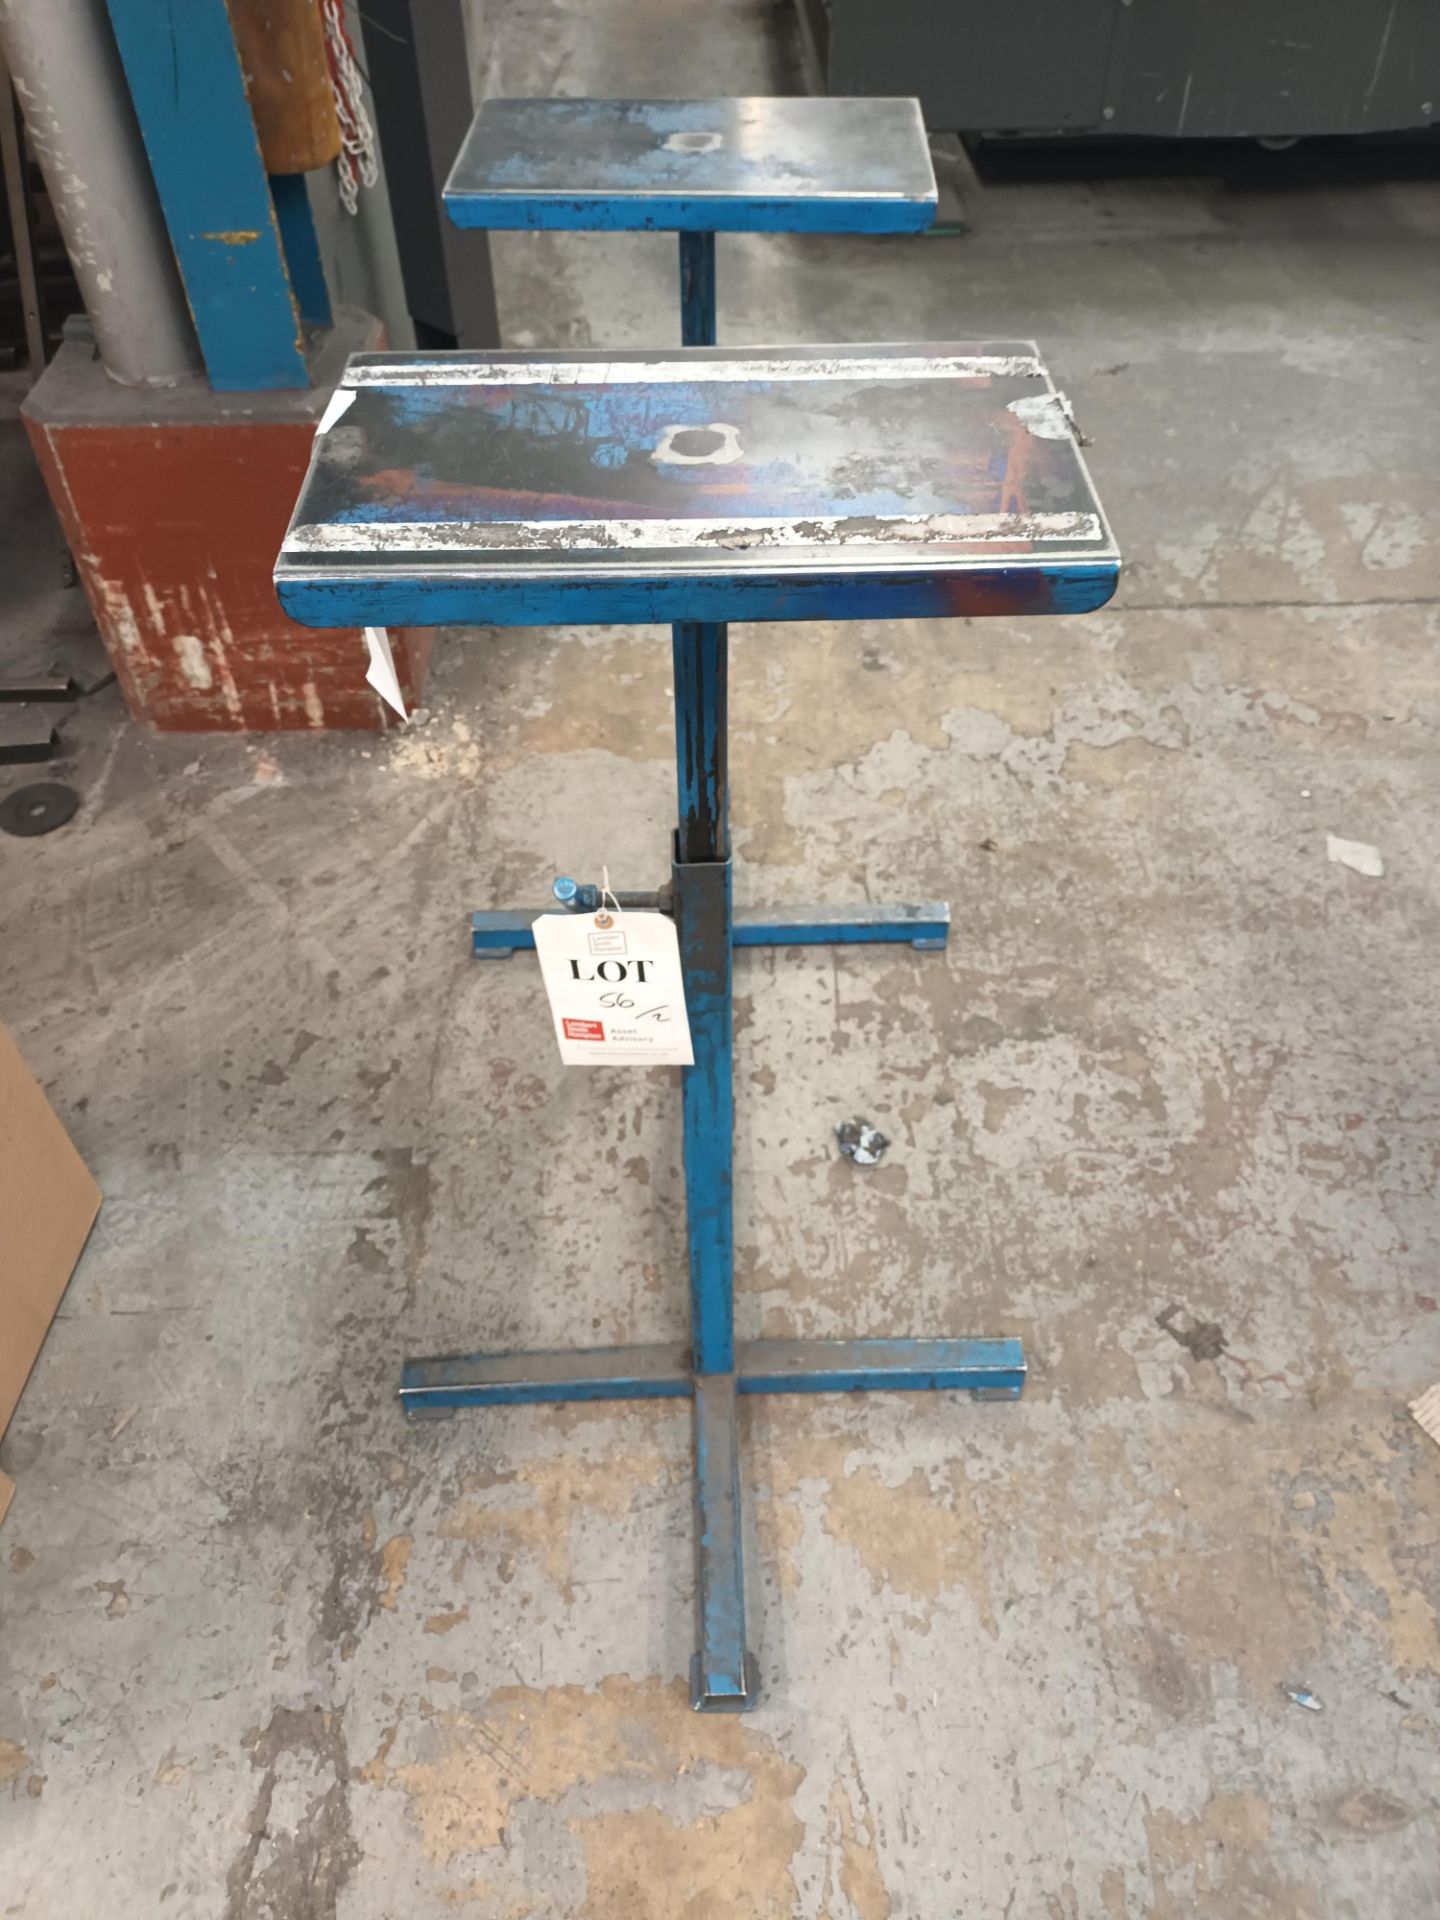 Two adjustable height tool stands